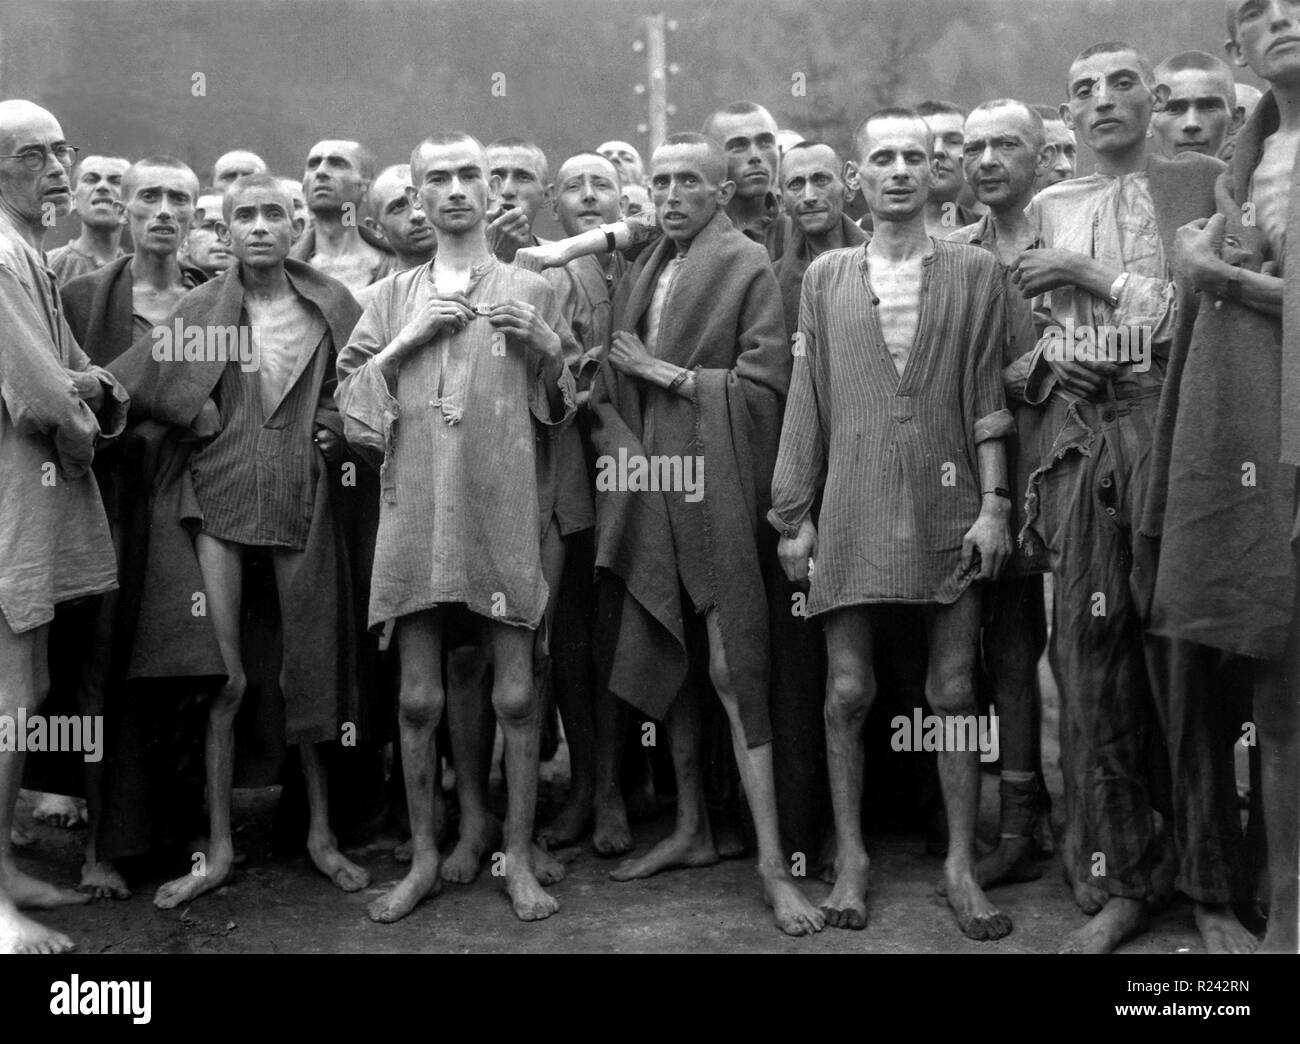 liberated prisoners at Ebensee concentration camp 1945. he Ebensee concentration camp was established by the SS to build tunnels for armaments storage near the town of Ebensee, Austria in 1943 Stock Photo